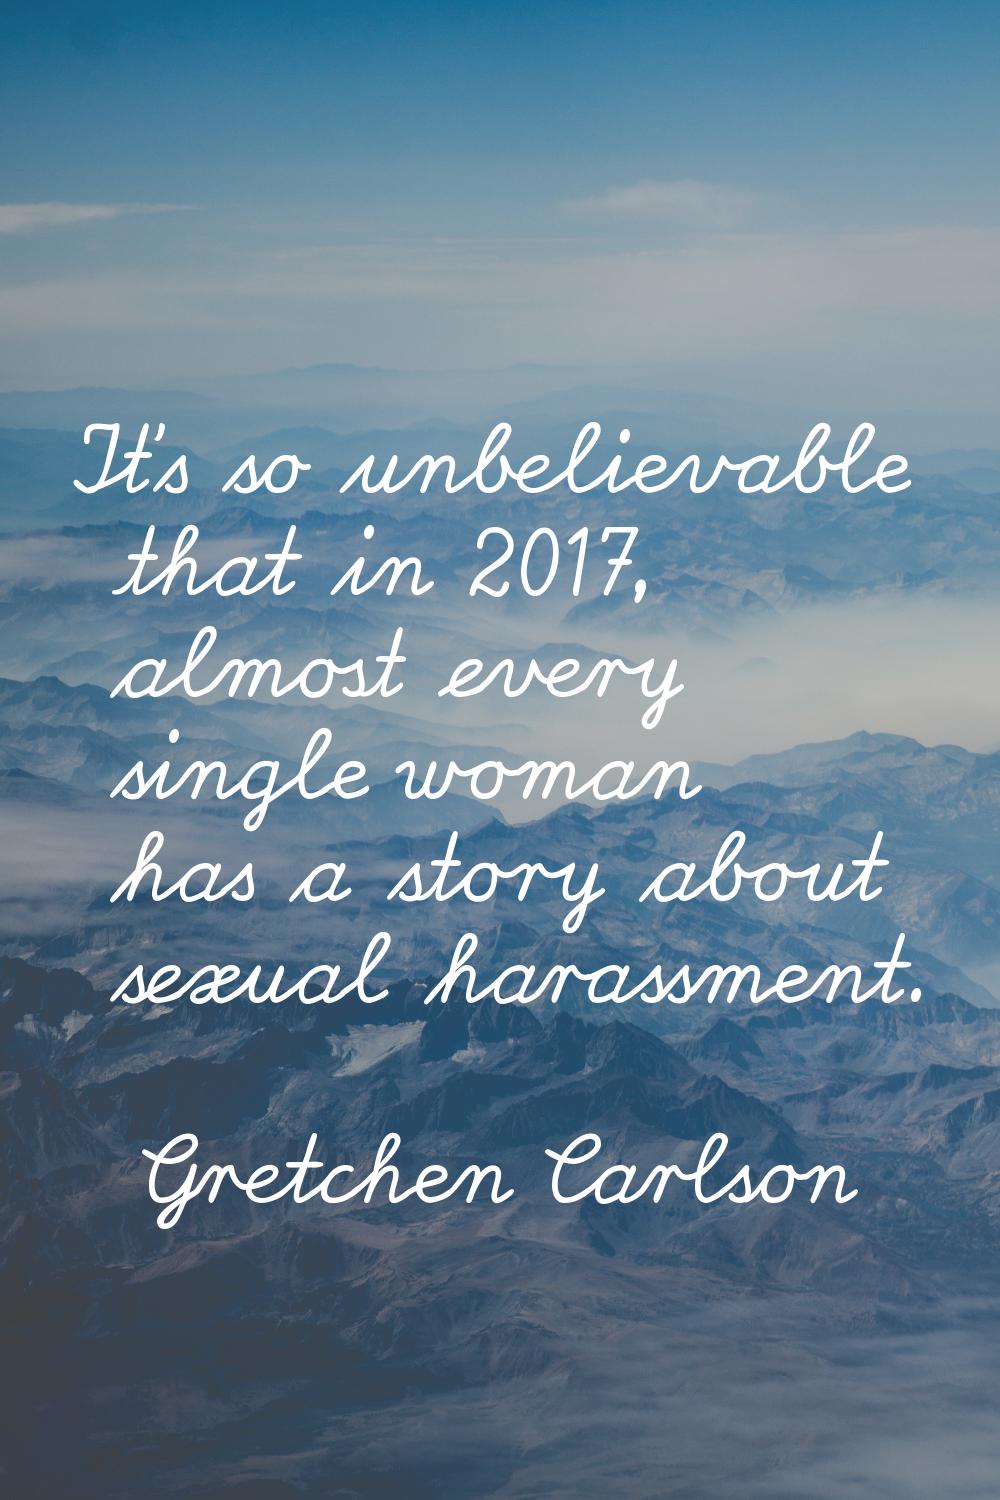 It's so unbelievable that in 2017, almost every single woman has a story about sexual harassment.